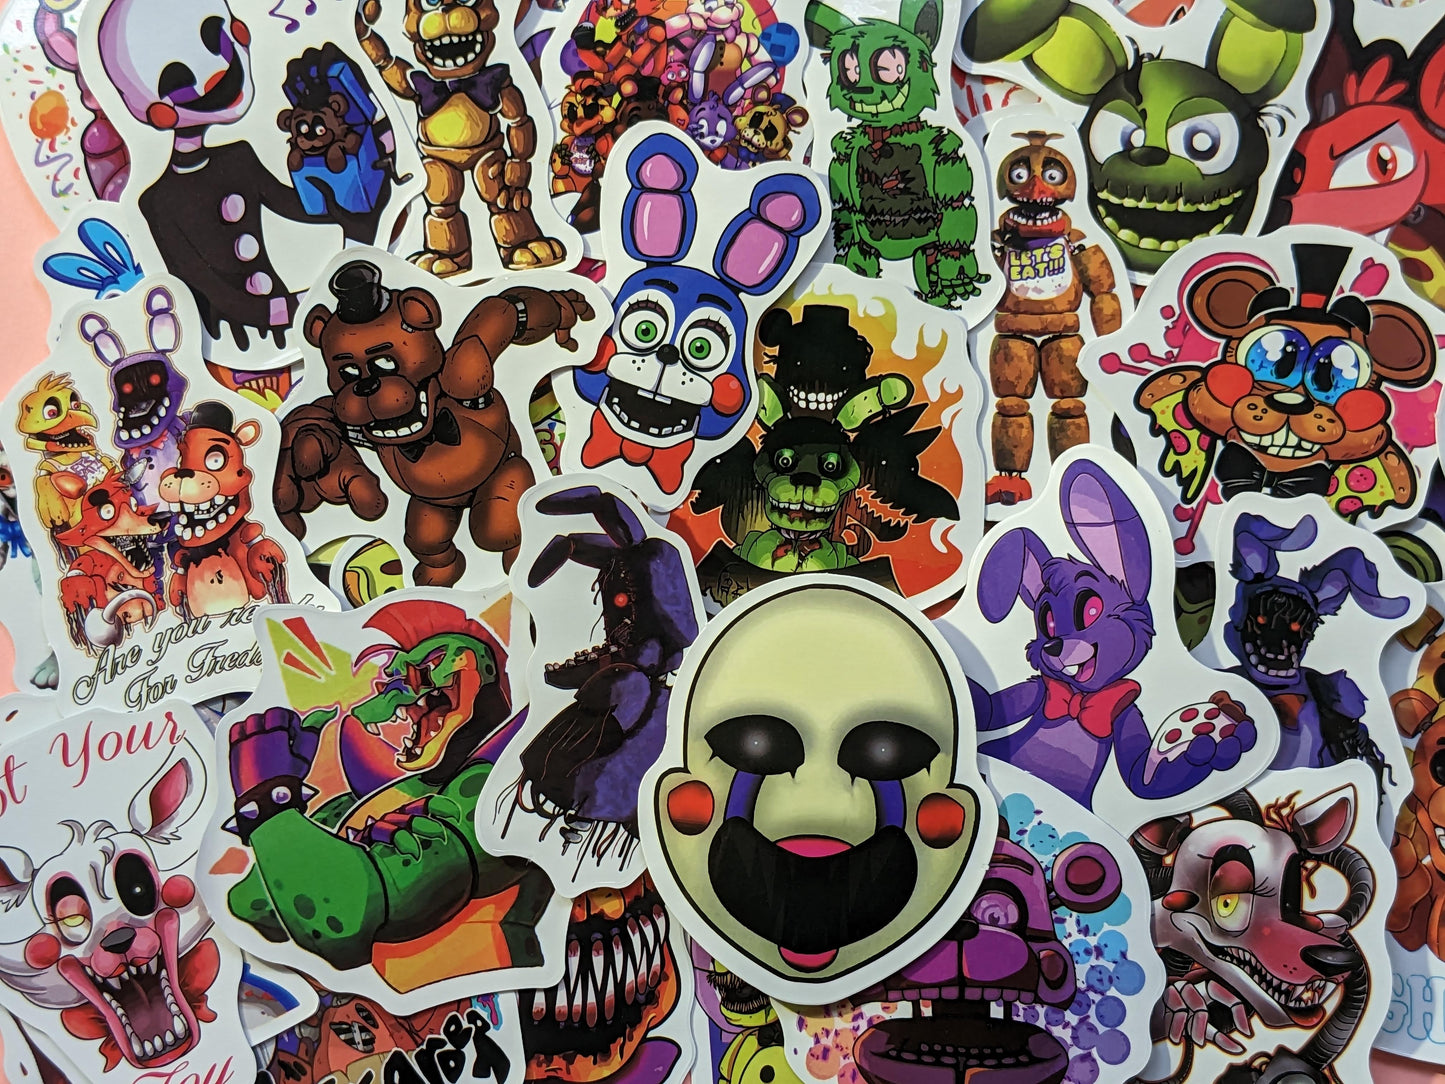 FIVE NIGHTS AT FREDDY'S Sticker Pack - Waterproof Decal Set, Indoor/Outdoor Use, Vivid Video Game Artwork, Retro Style Fun and Scary Gift Set